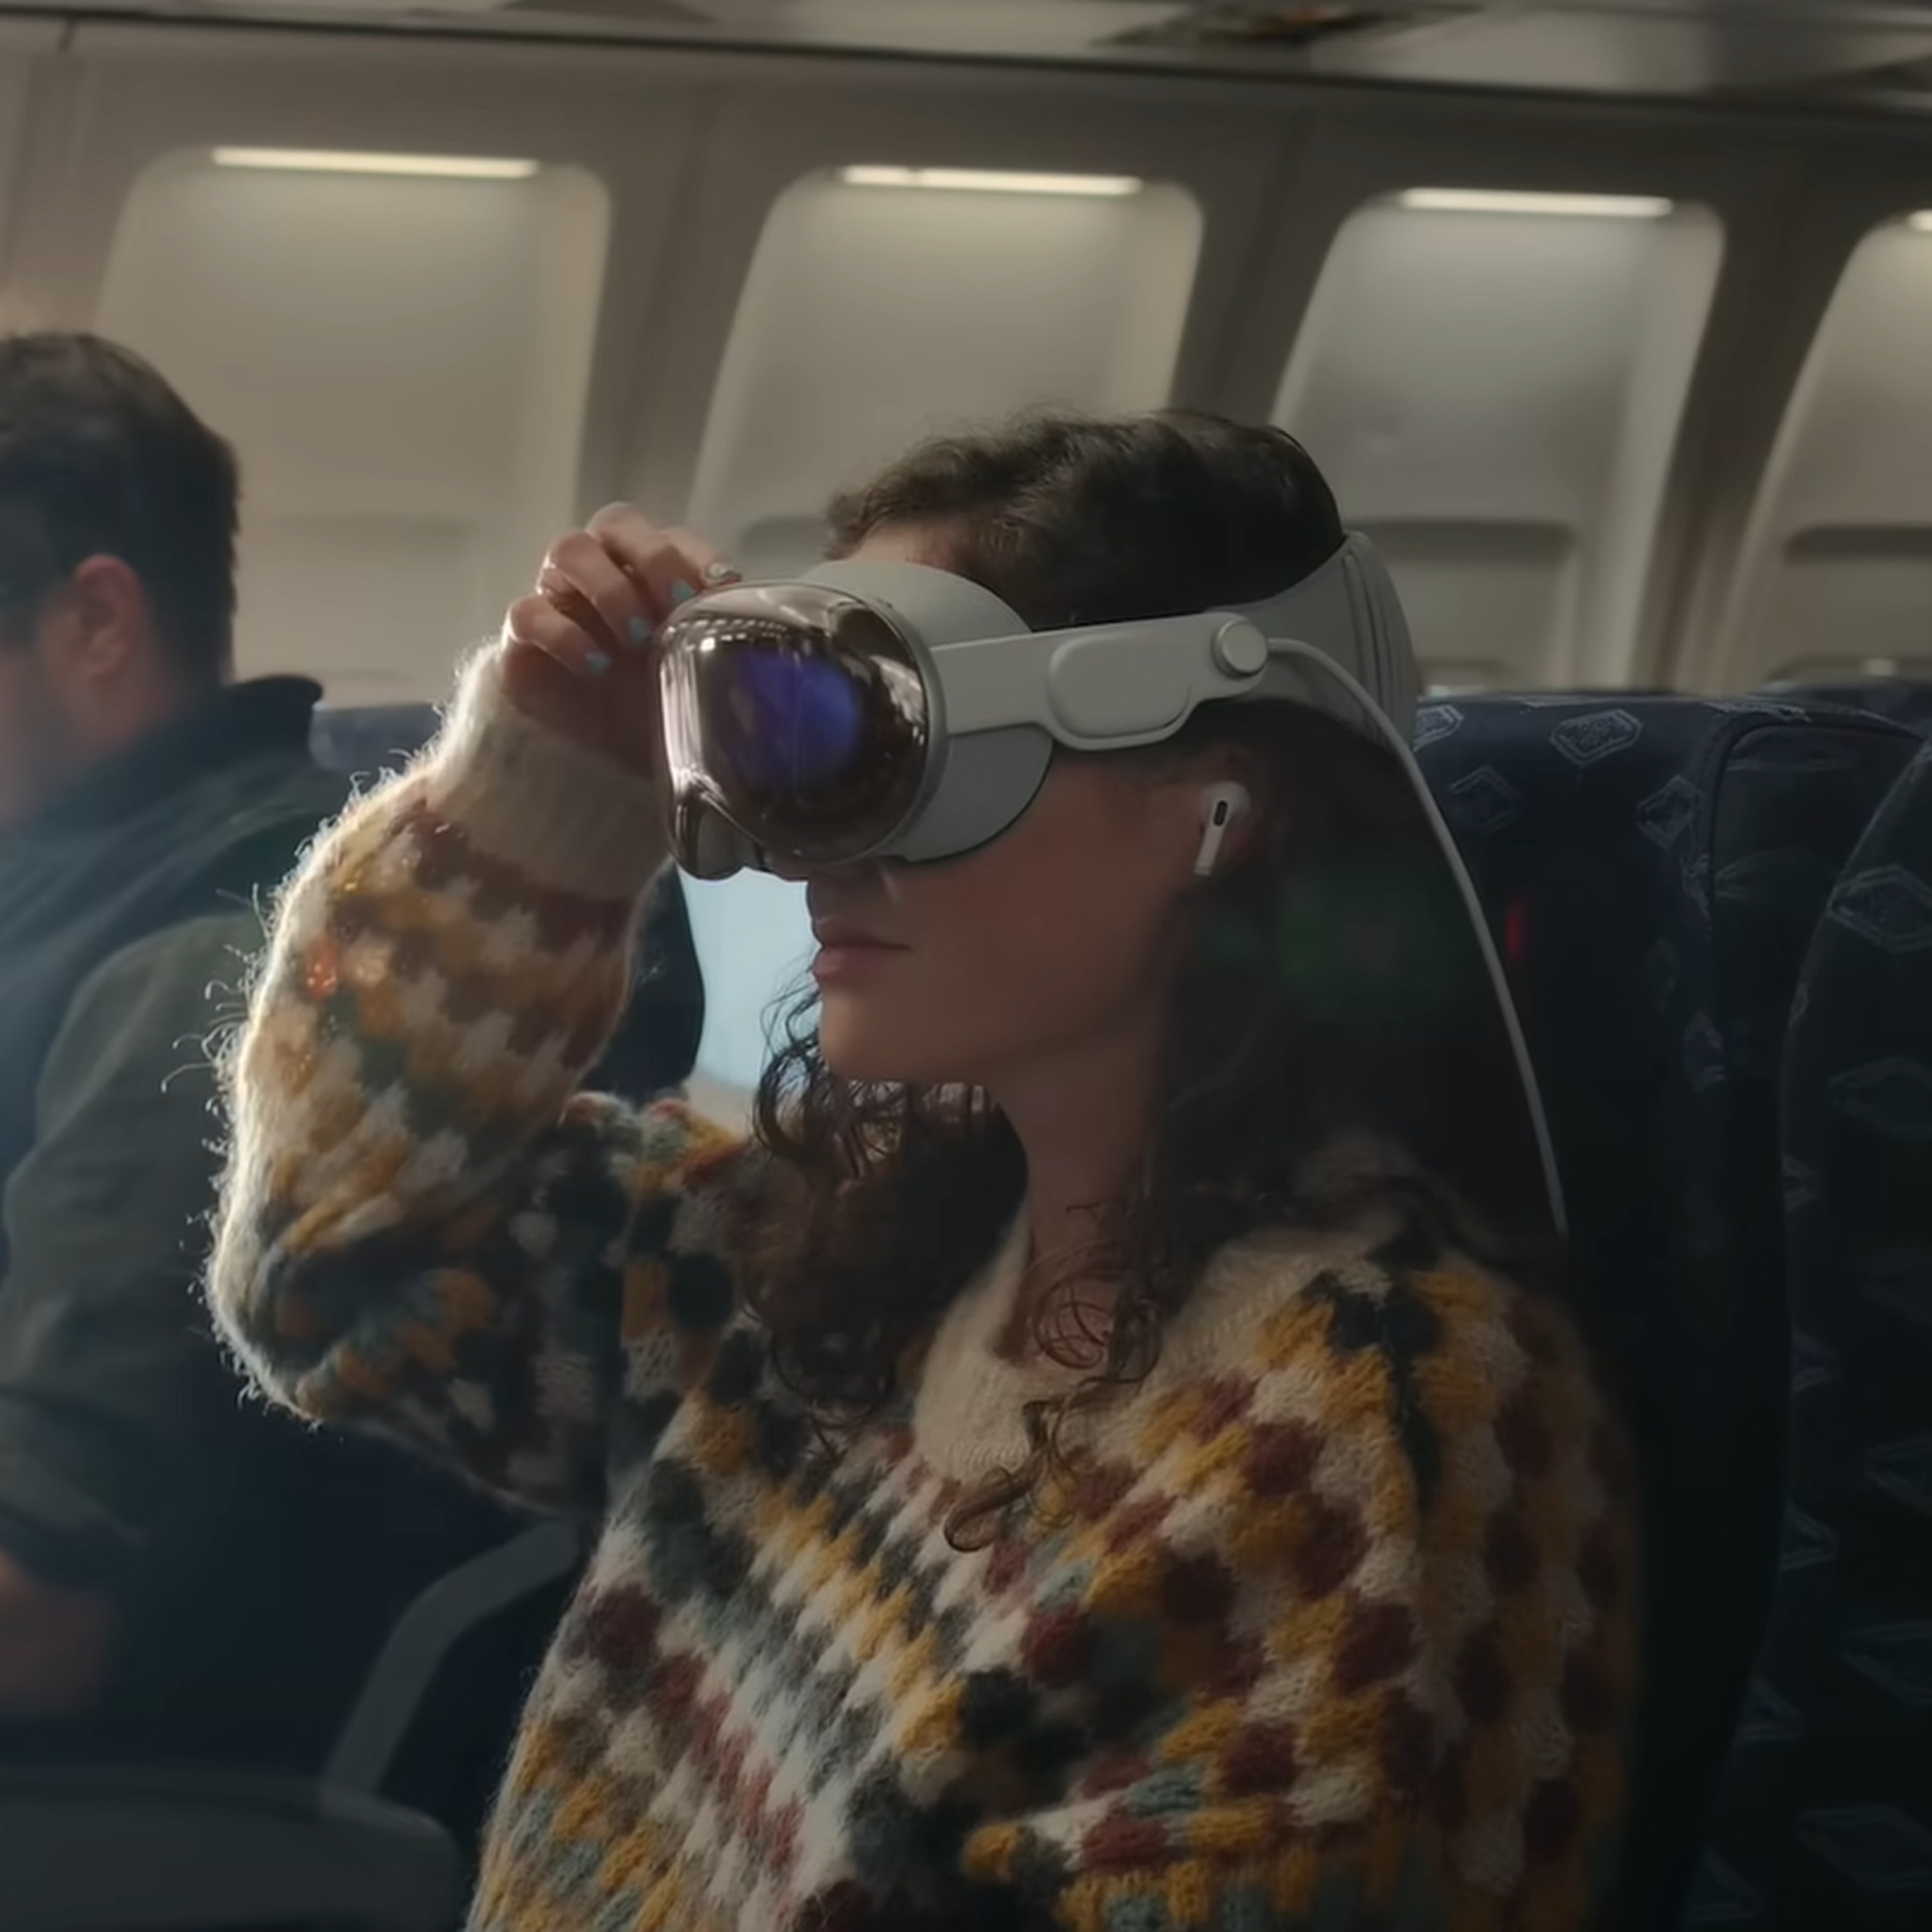 An image of a woman wearing Apple’s Vision Pro headset and AirPods Pro on a plane.